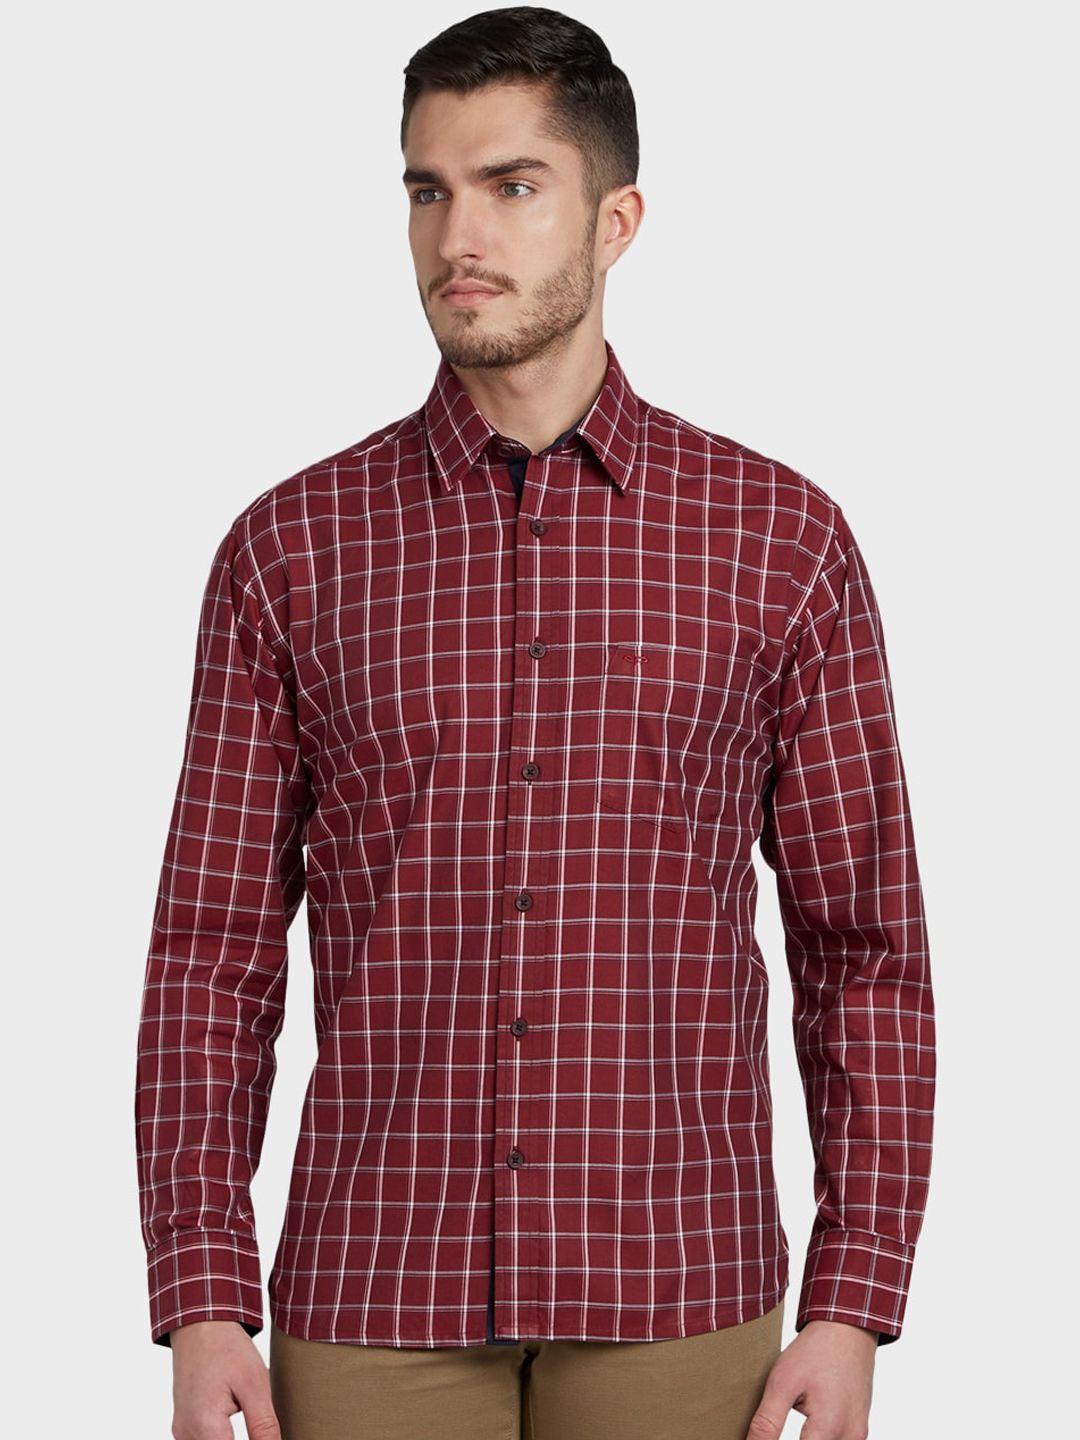 colorplus-men-maroon-&-white-regular-fit-checked-casual-shirt